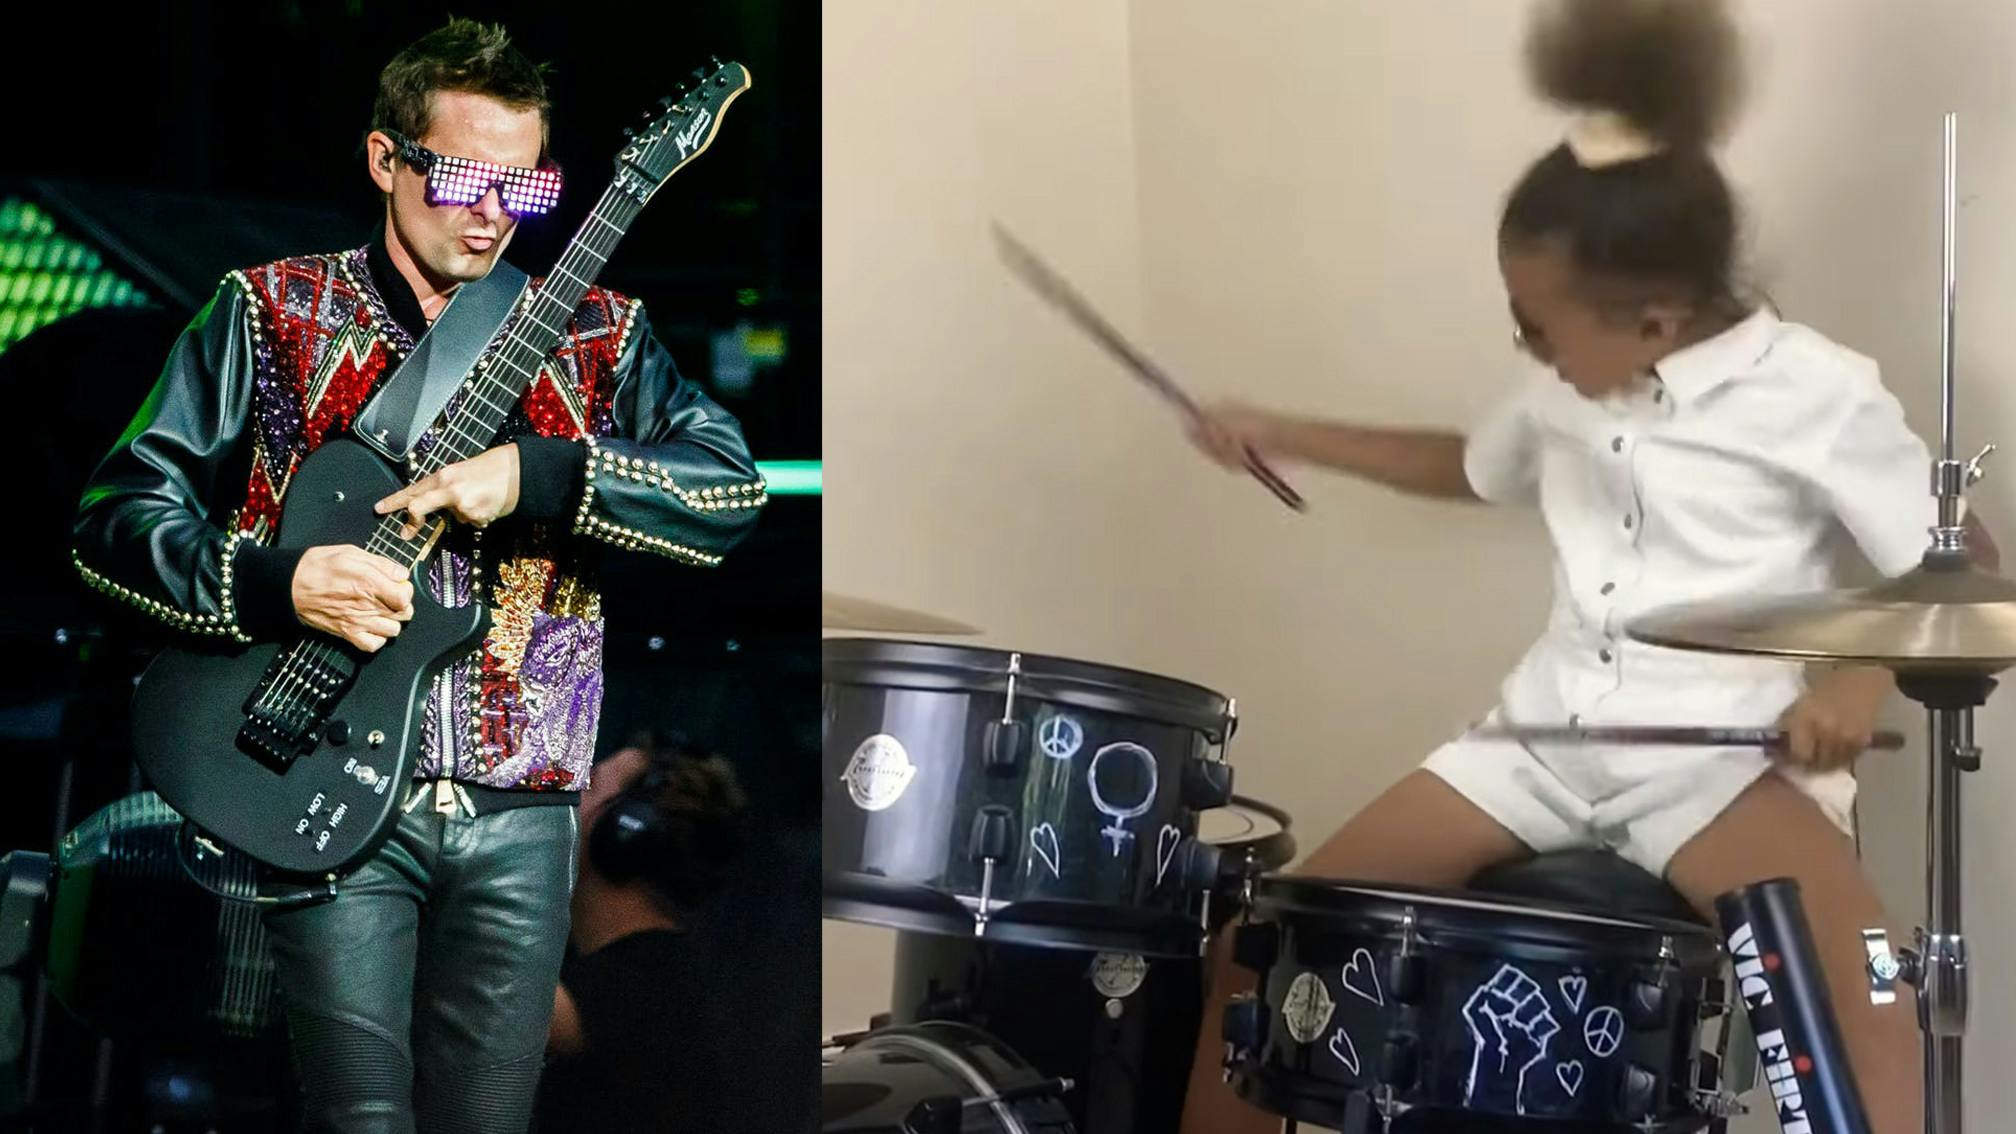 "So much talent": Muse respond to Nandi Bushell’s Hysteria cover